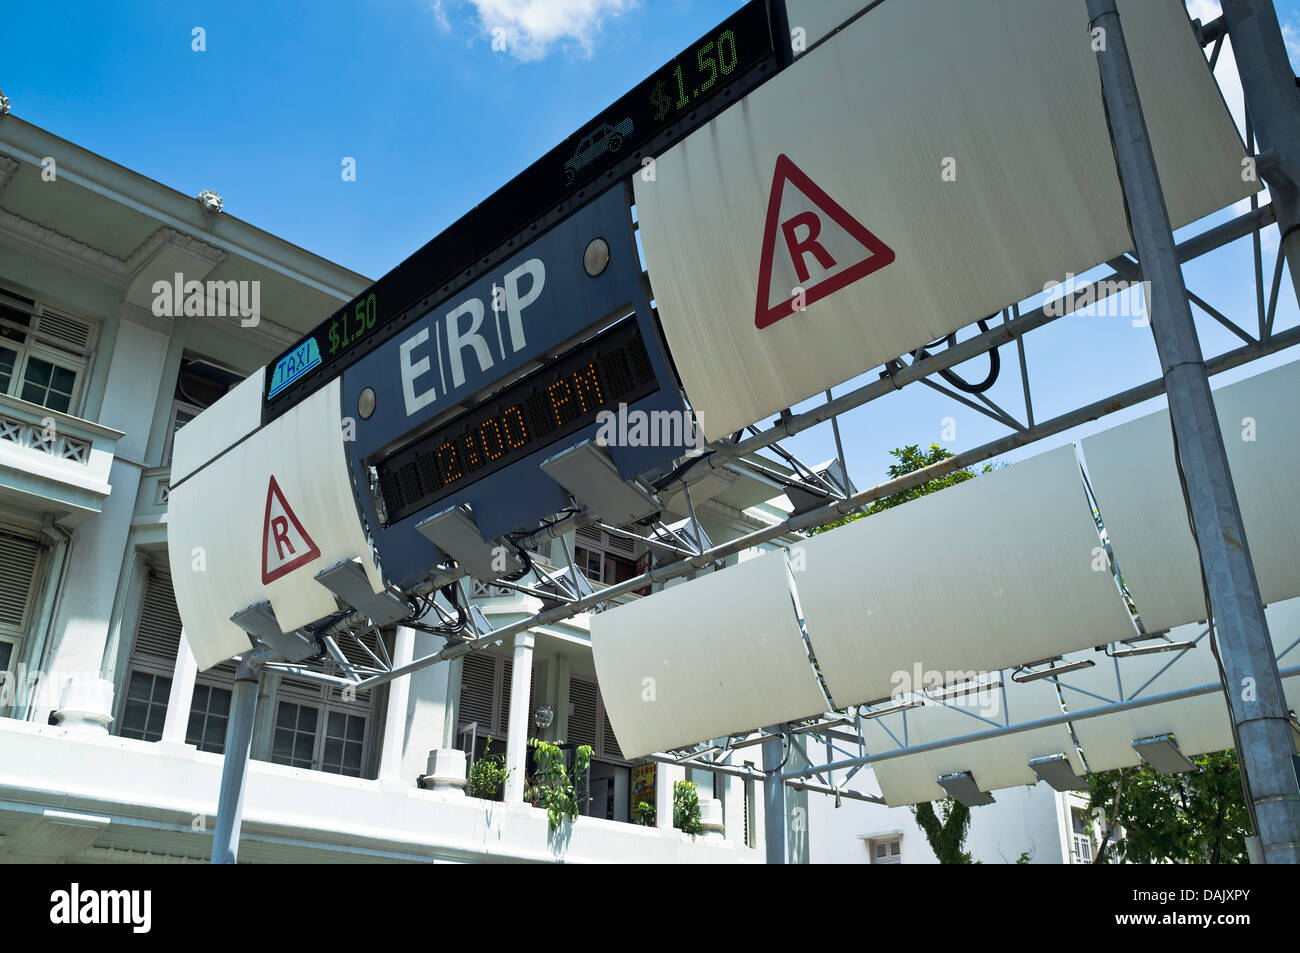 dh ERP electronic road price QUEEN STREET SINGAPORE Toll collection point gantry traffic management system sign Stock Photo